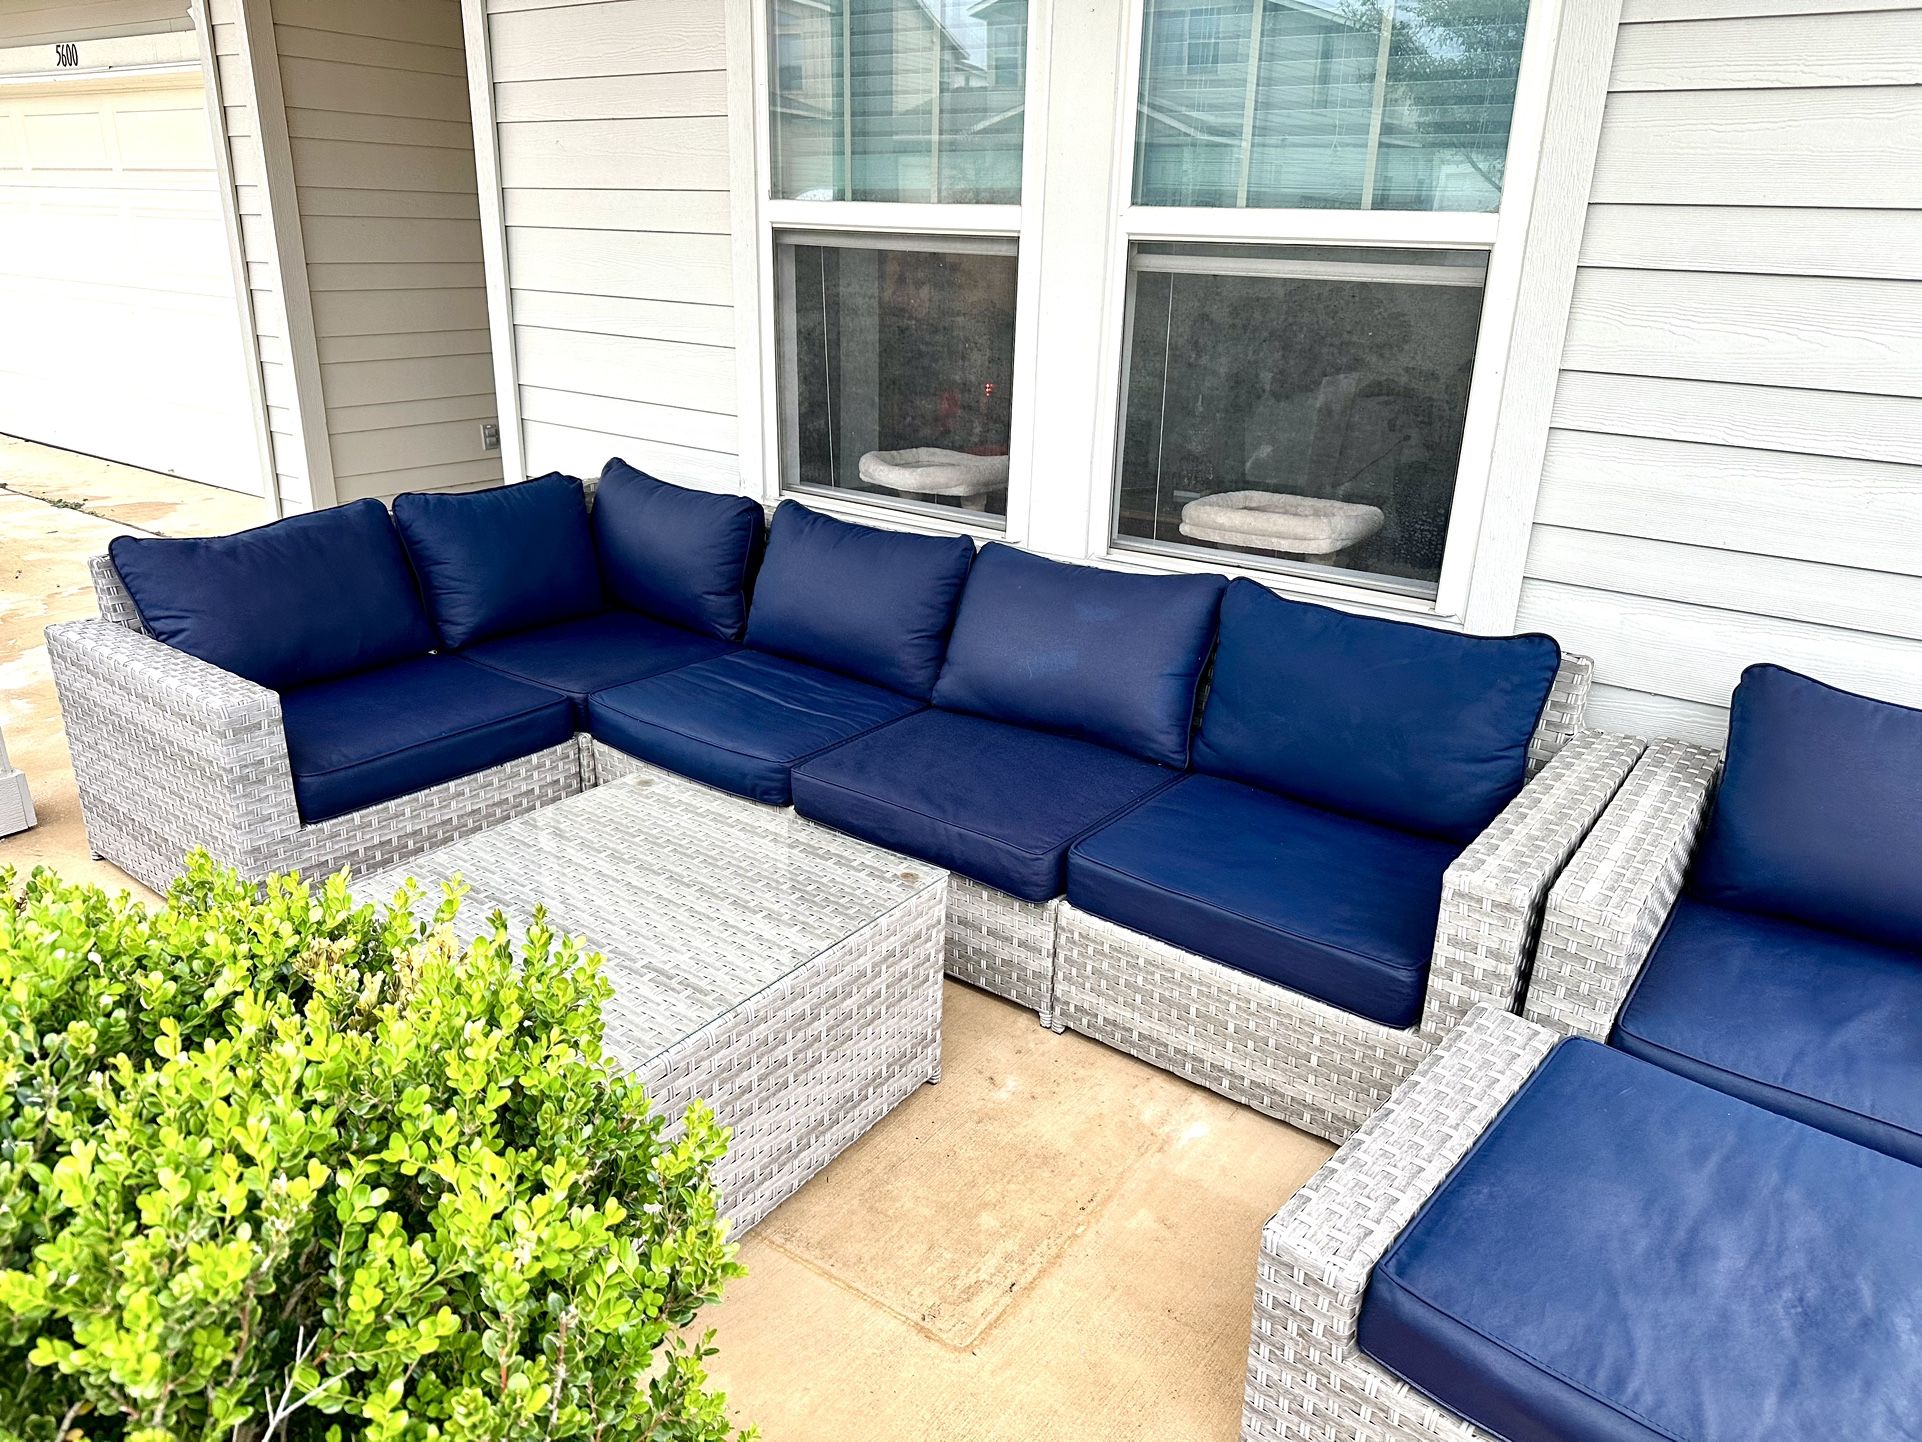 kordell 6 Person Outdoor seating group with cushions.